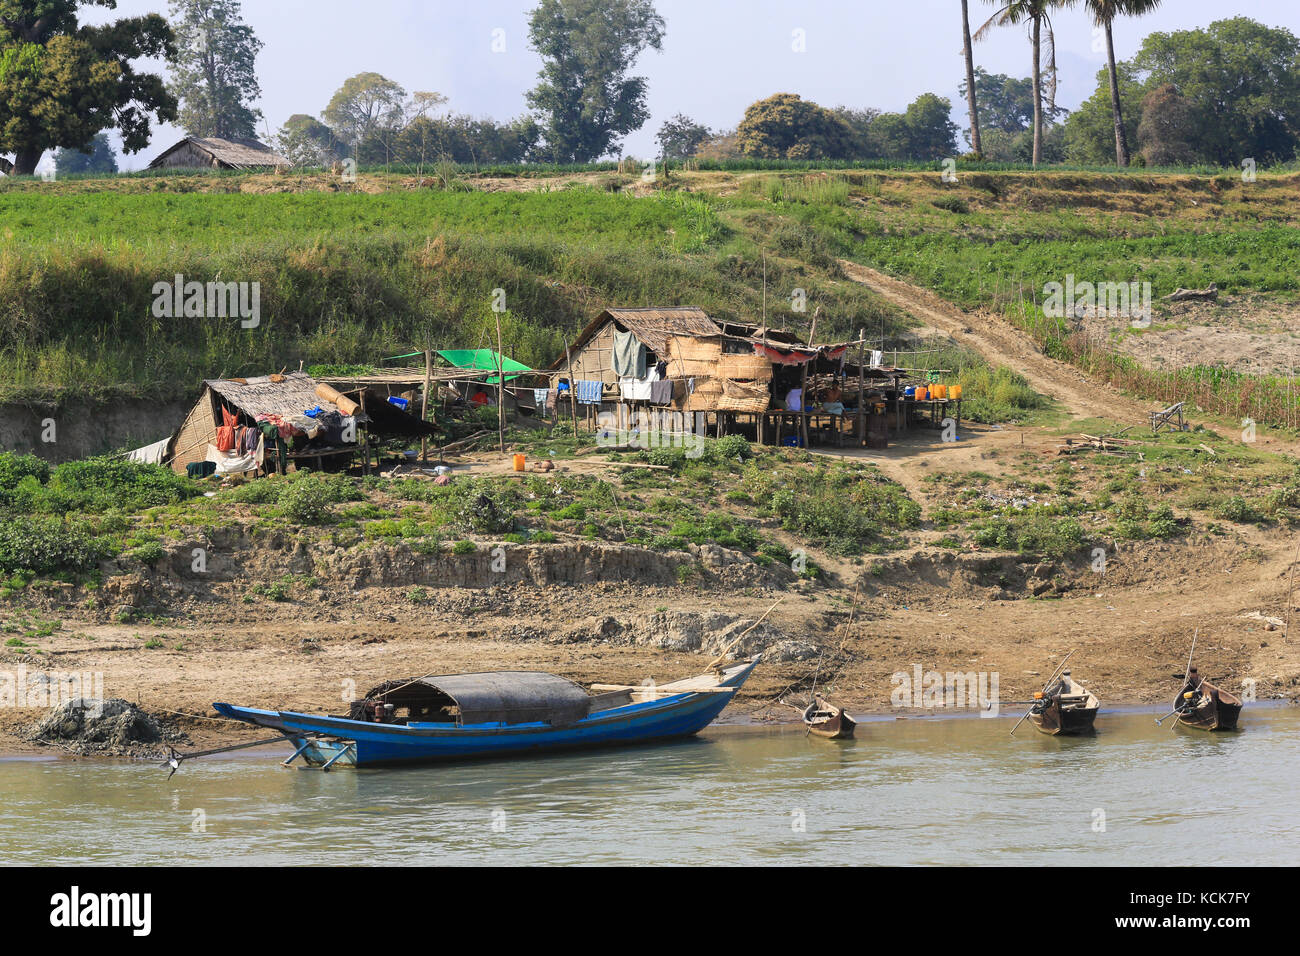 Seasonal huts and shelters along the banks of the Irrawaddy River in Myanmar (Burma). Stock Photo